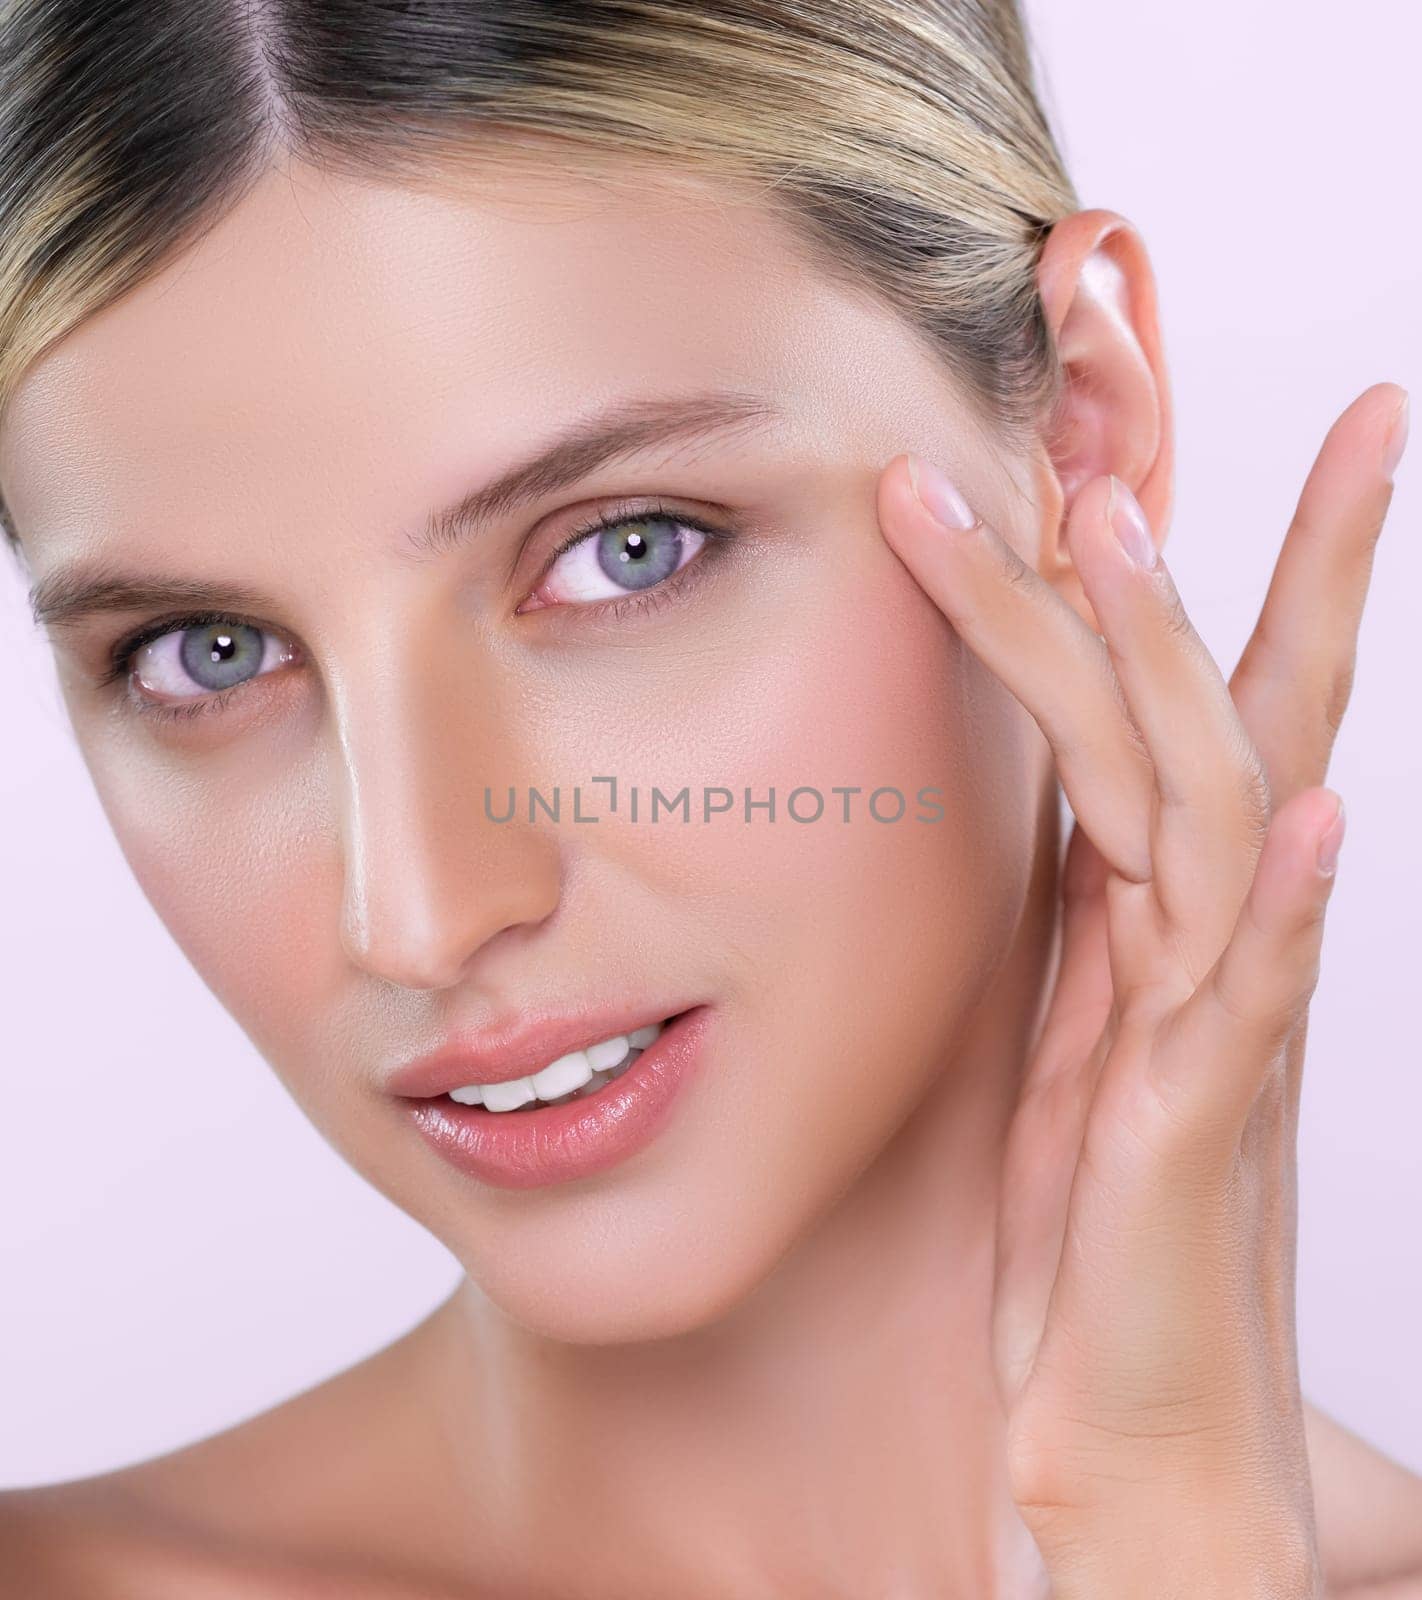 Closeup alluring beautiful woman with perfect smooth and clean skin portrait in isolated background. Beauty hand gesture with expressive facial expression for skincare treatment product or spa.